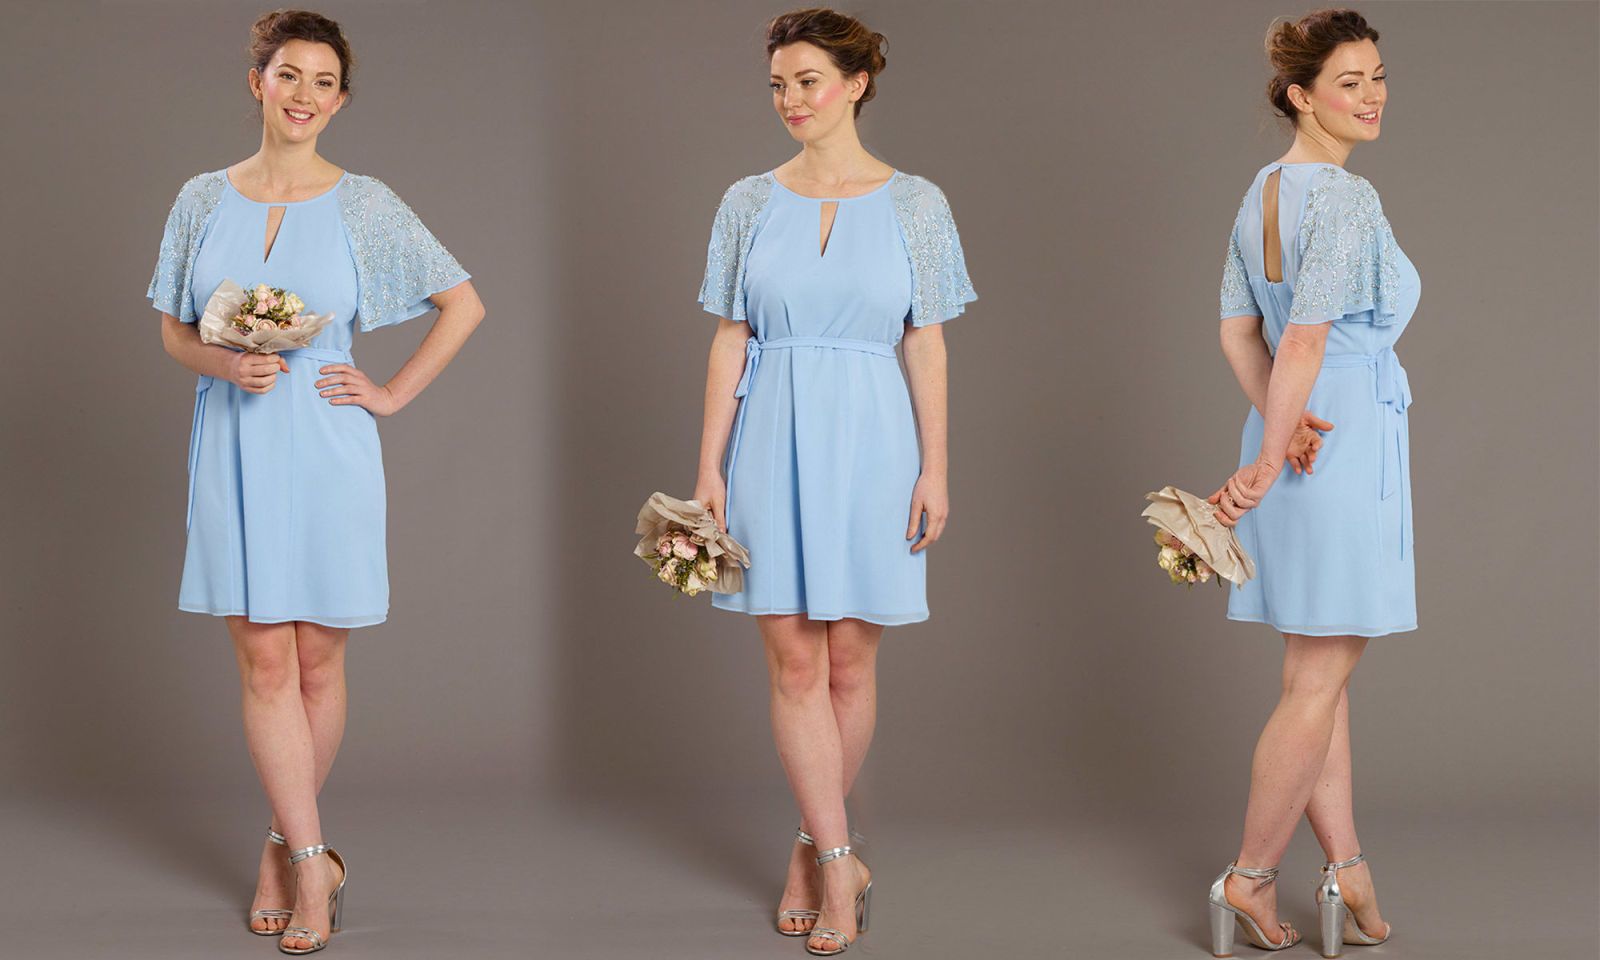 bridesmaid dresses for large bust